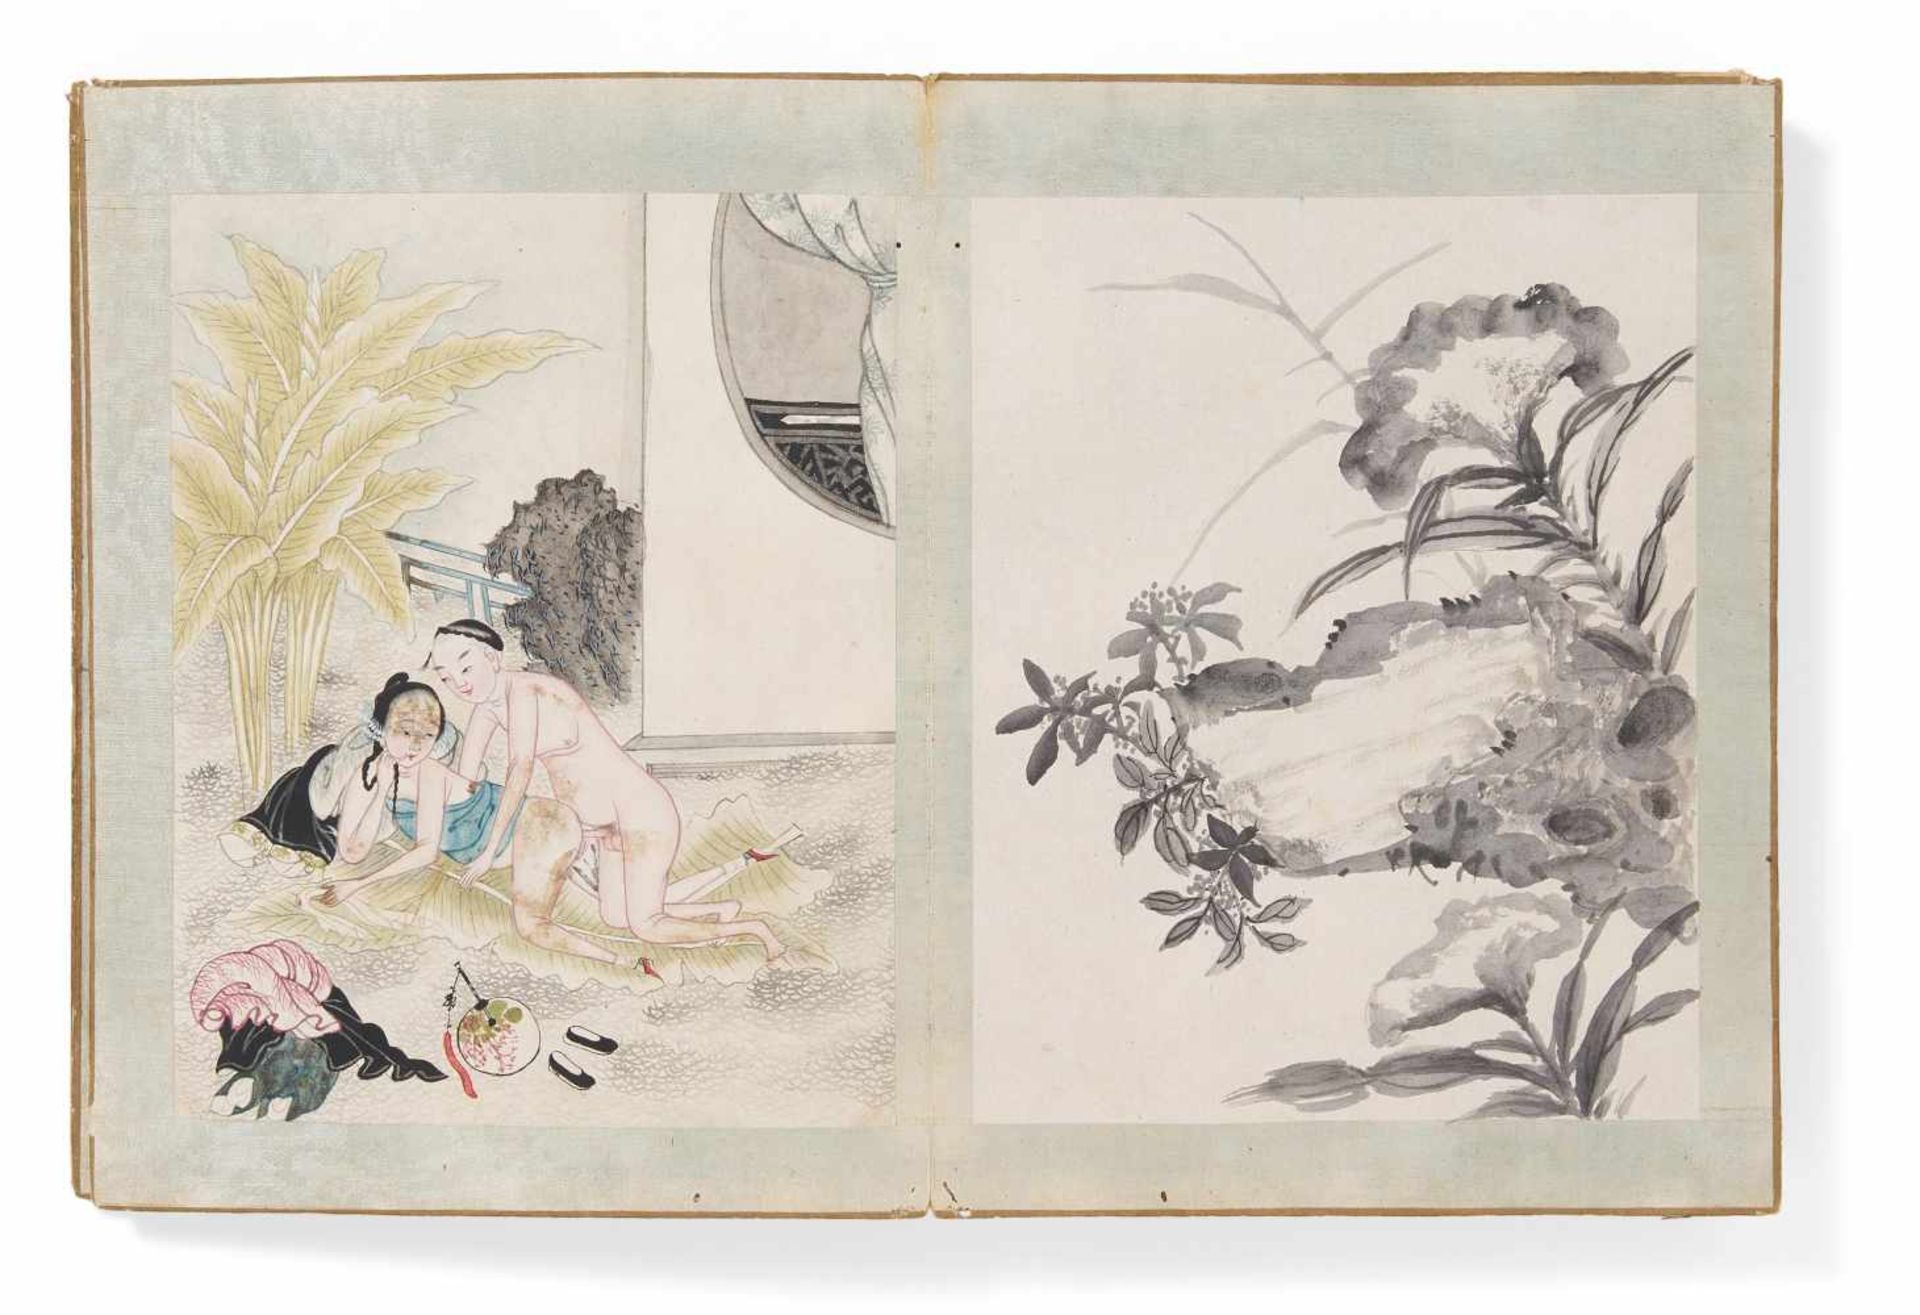 FANFOLD BOOK WITH 18 EROTIC AND 18 BLACK INK PAINTINGS. China. Qing dynasty. 18th/19th c. Ink,